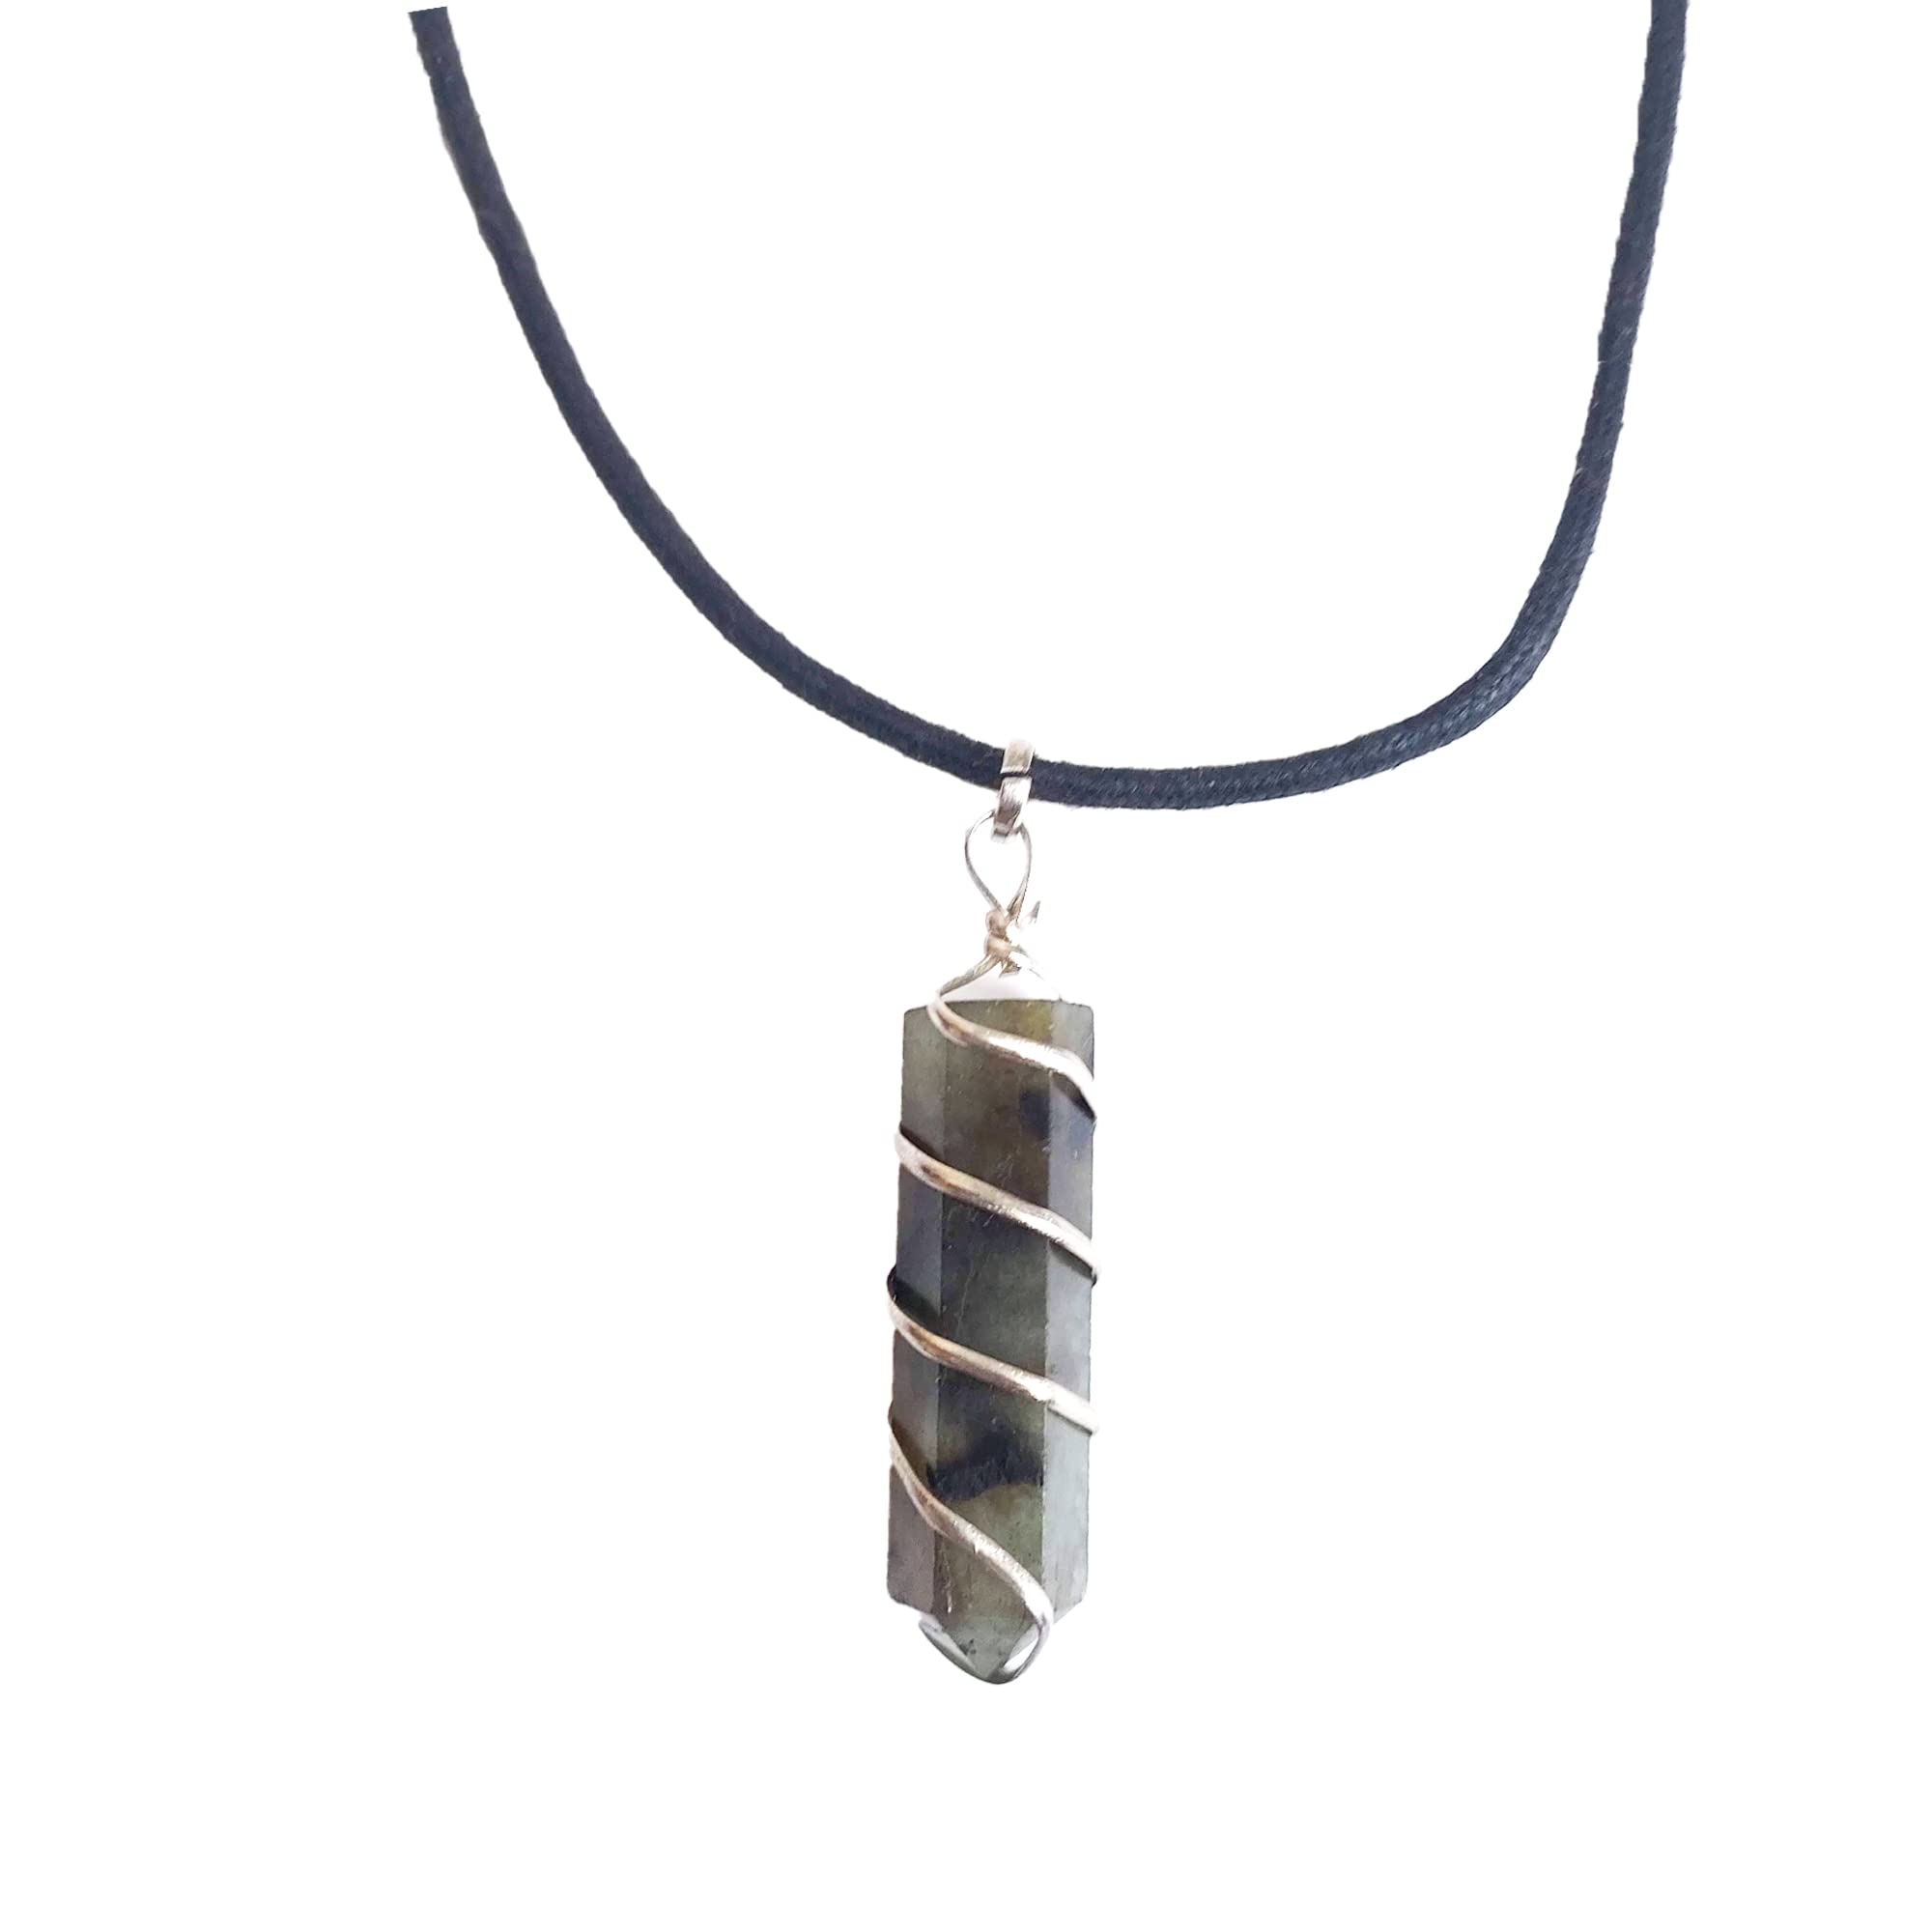 KITREE NATURAL LABRADORITE CRYSTAL STONE RECTANGLE PENDENT WITH CHAIN FOR UNISEX 5 CM APPROX. (COLOR GREY) (DESIGN 01)